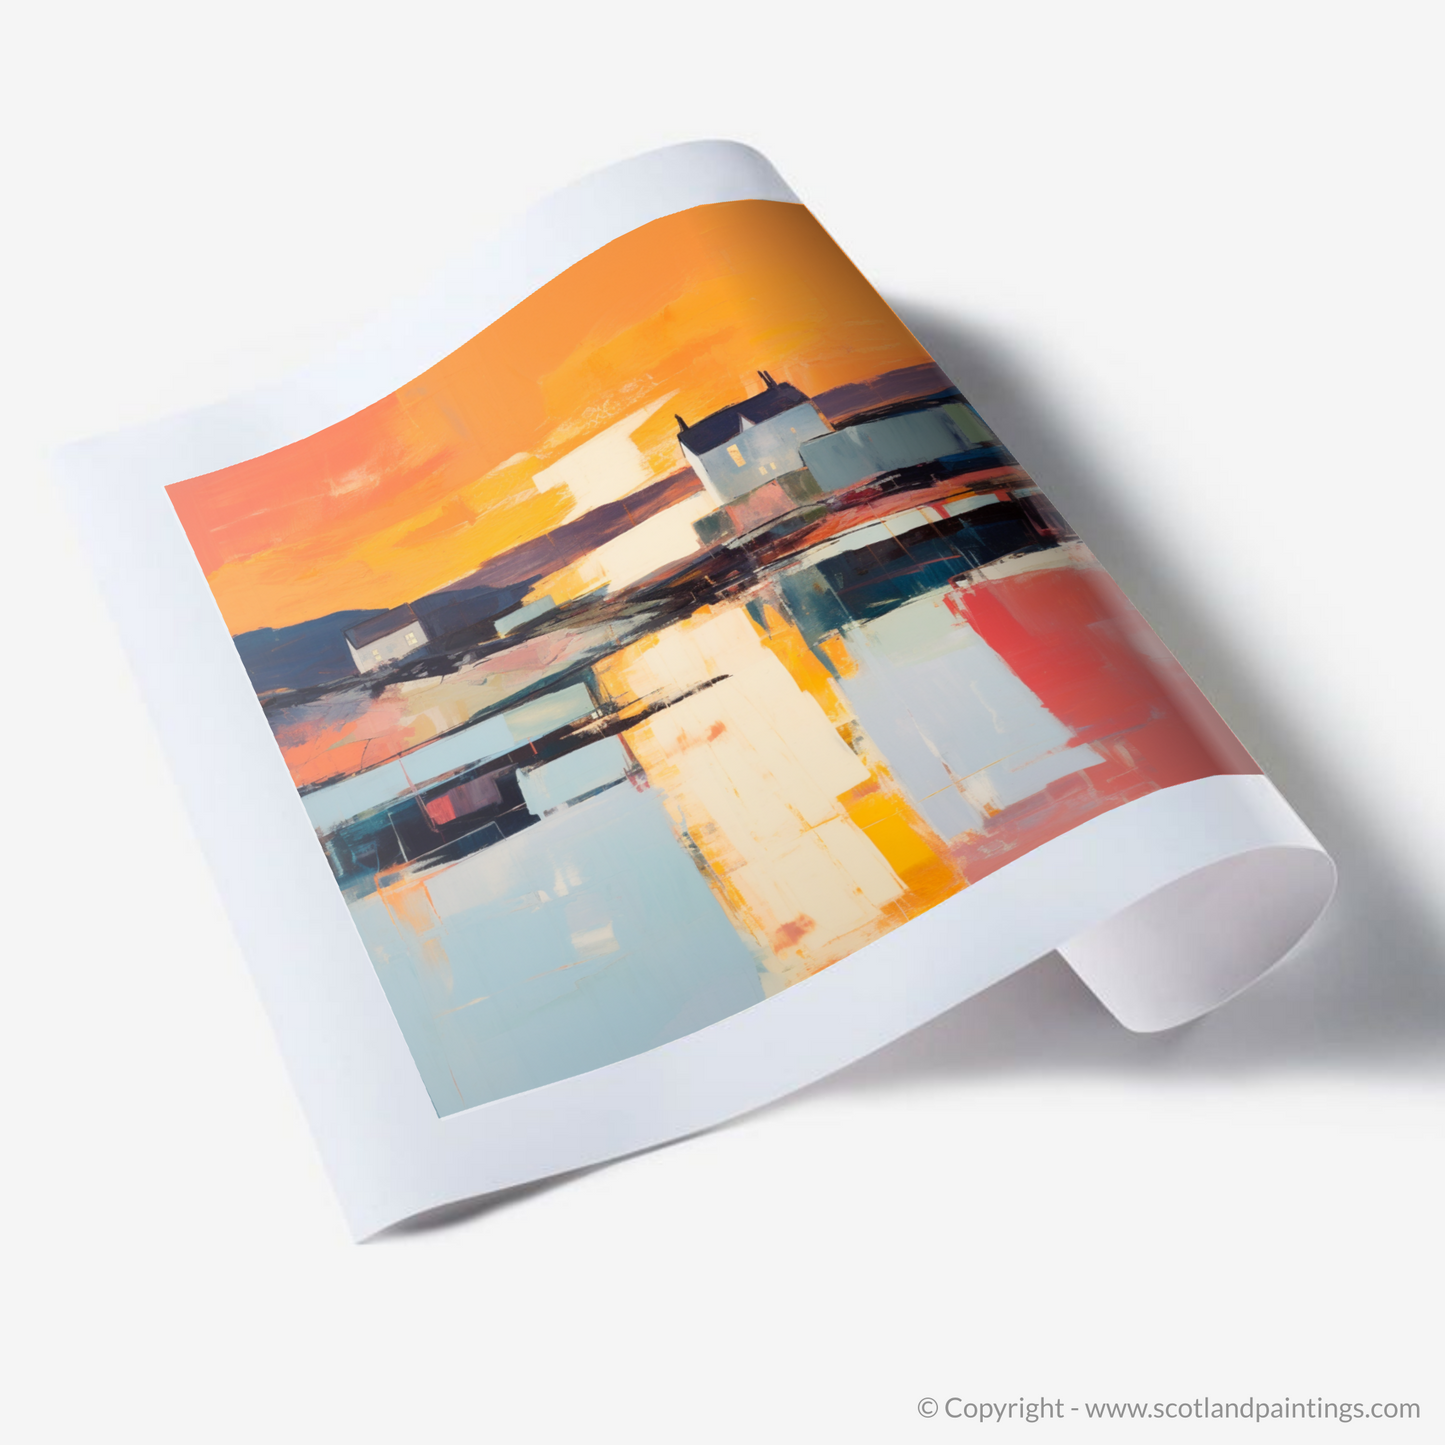 Craobh Haven Harbour at Twilight: A Colour Field Ode to Scottish Shores